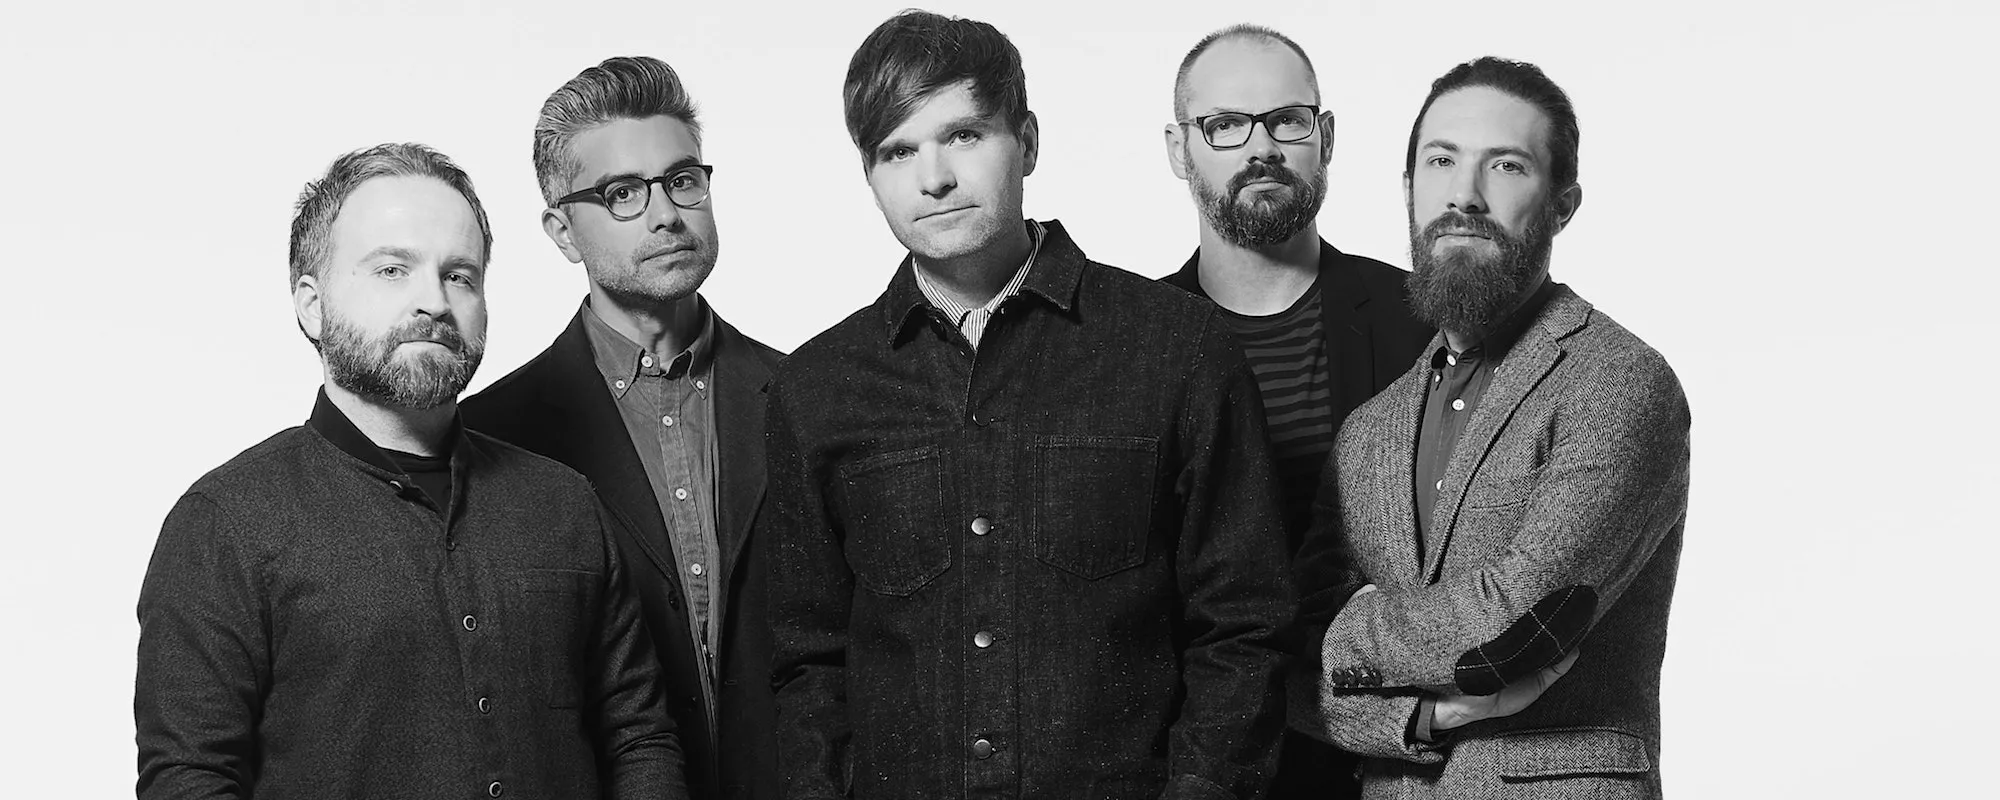 In Wake of Texas School Shooting, Death Cab for Cutie Does Not Release New Music Video